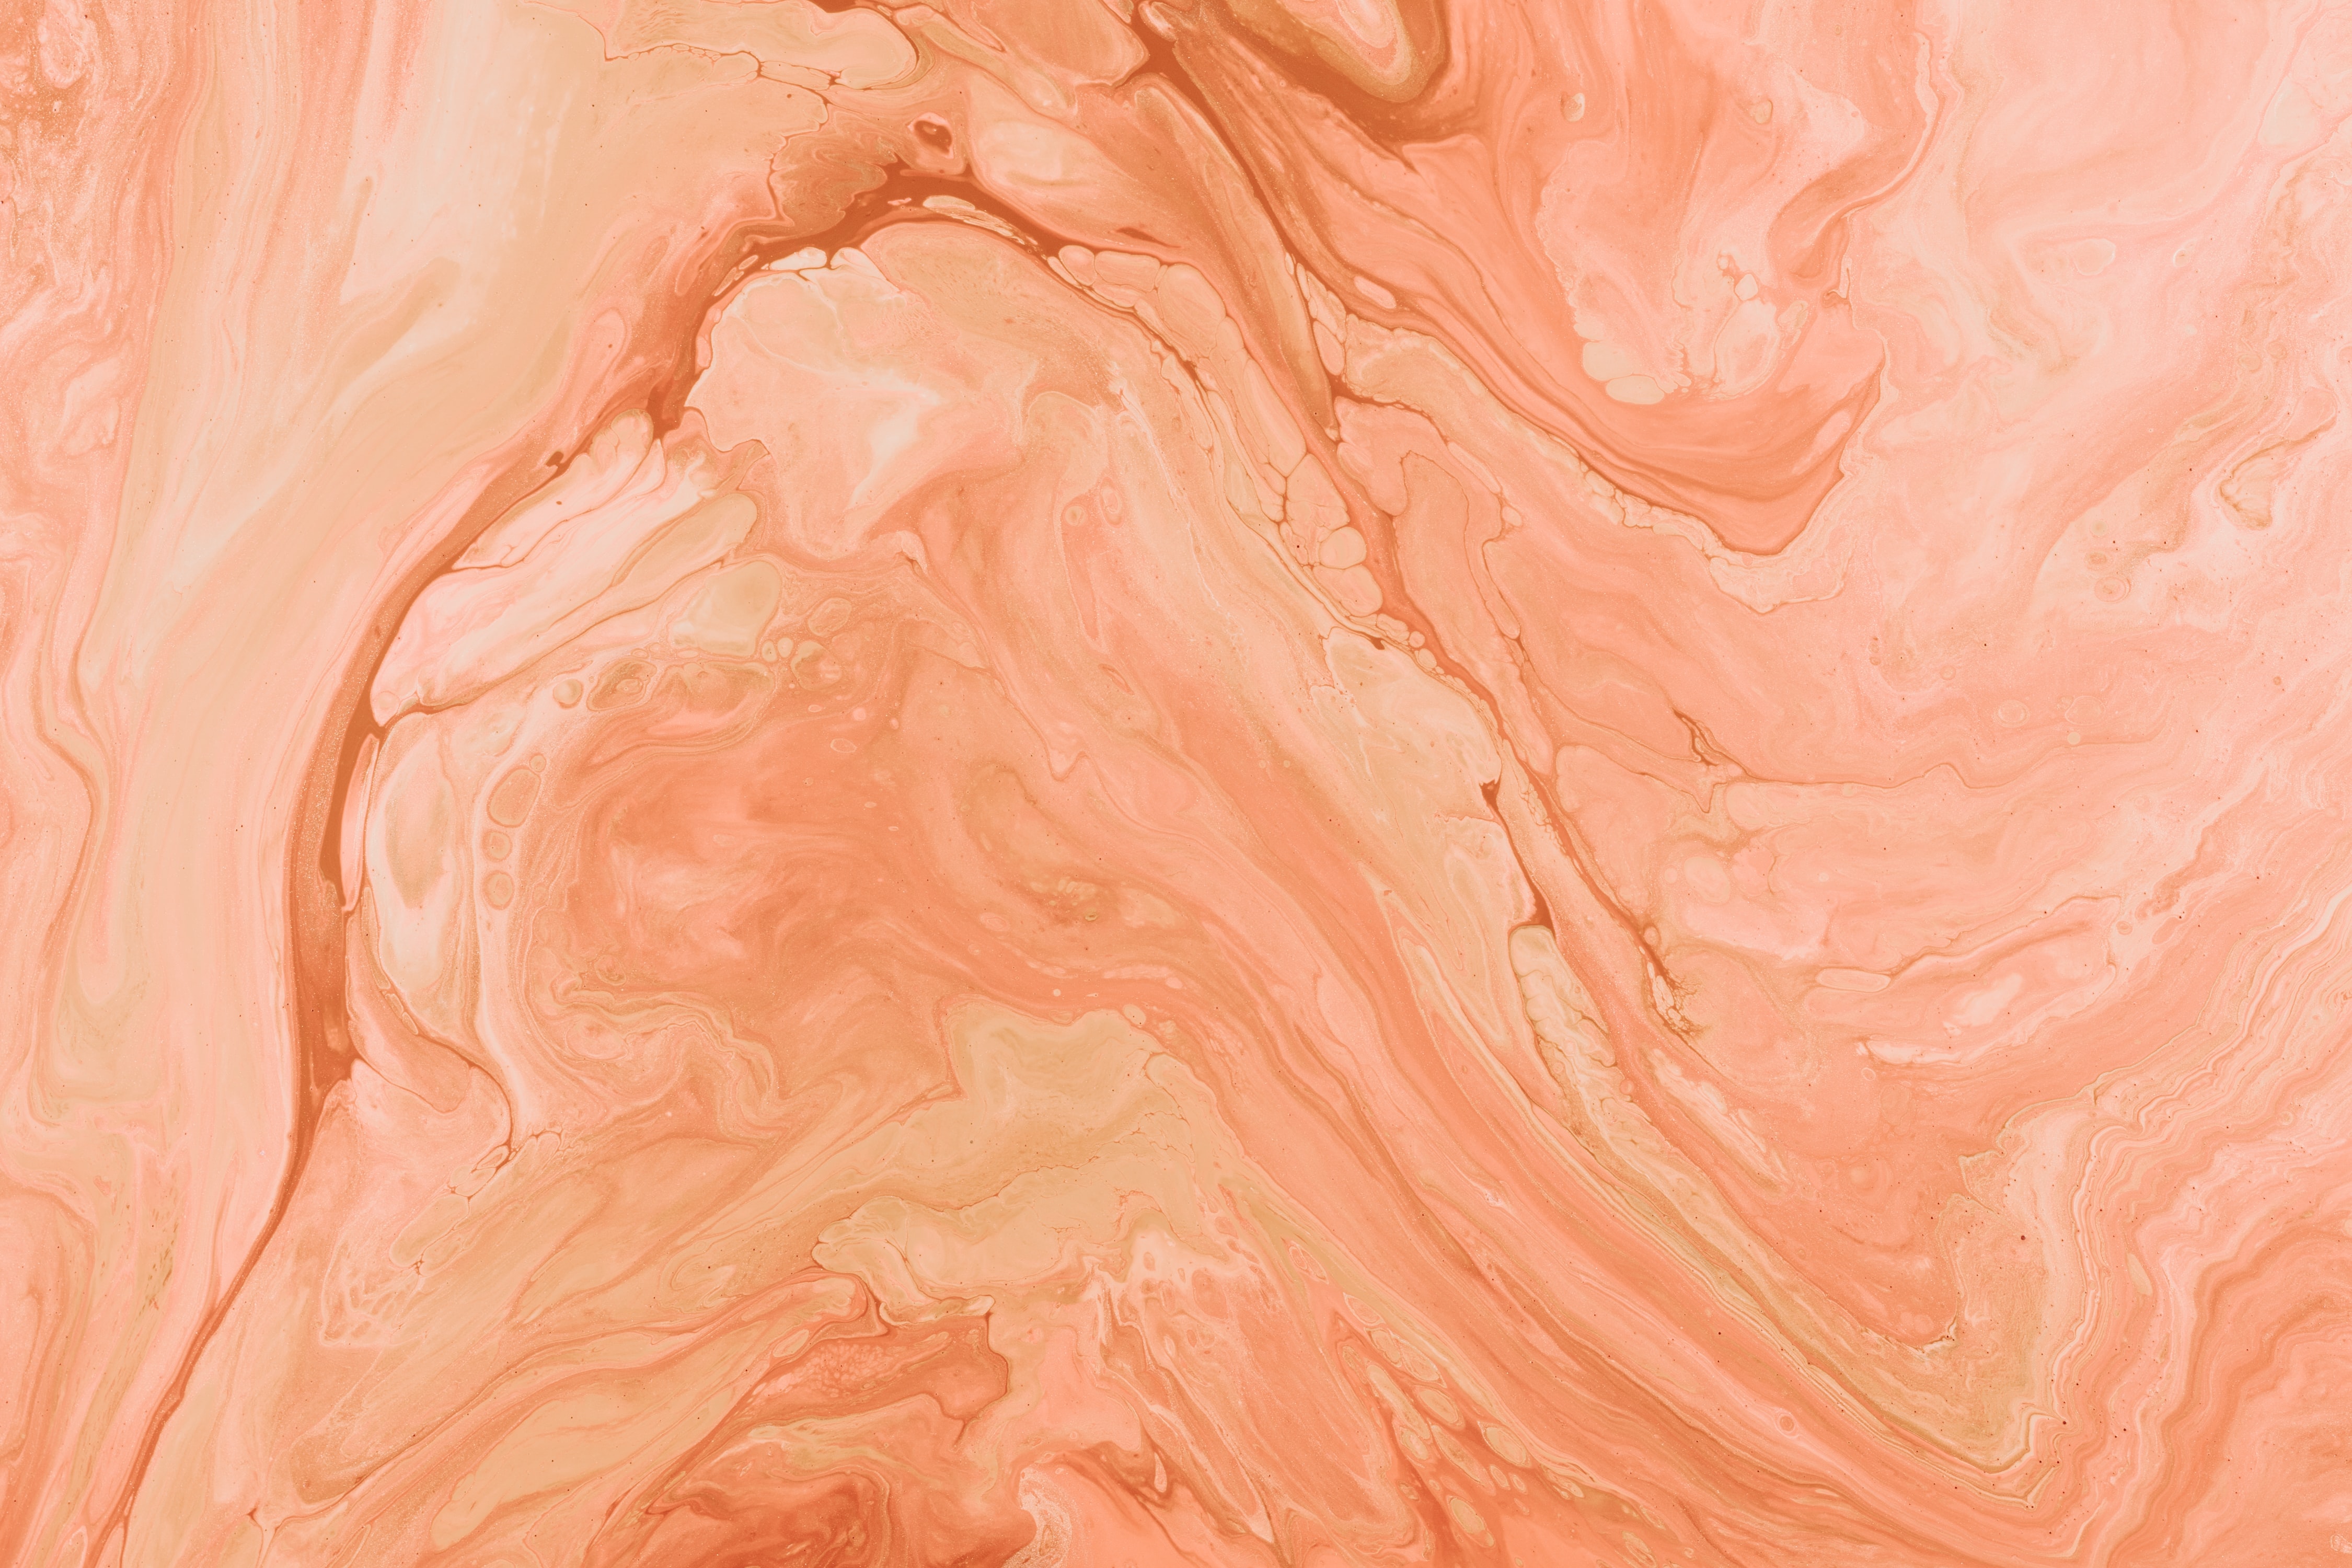 spots, brown, liquid, paint, abstract, divorces, stains 2160p